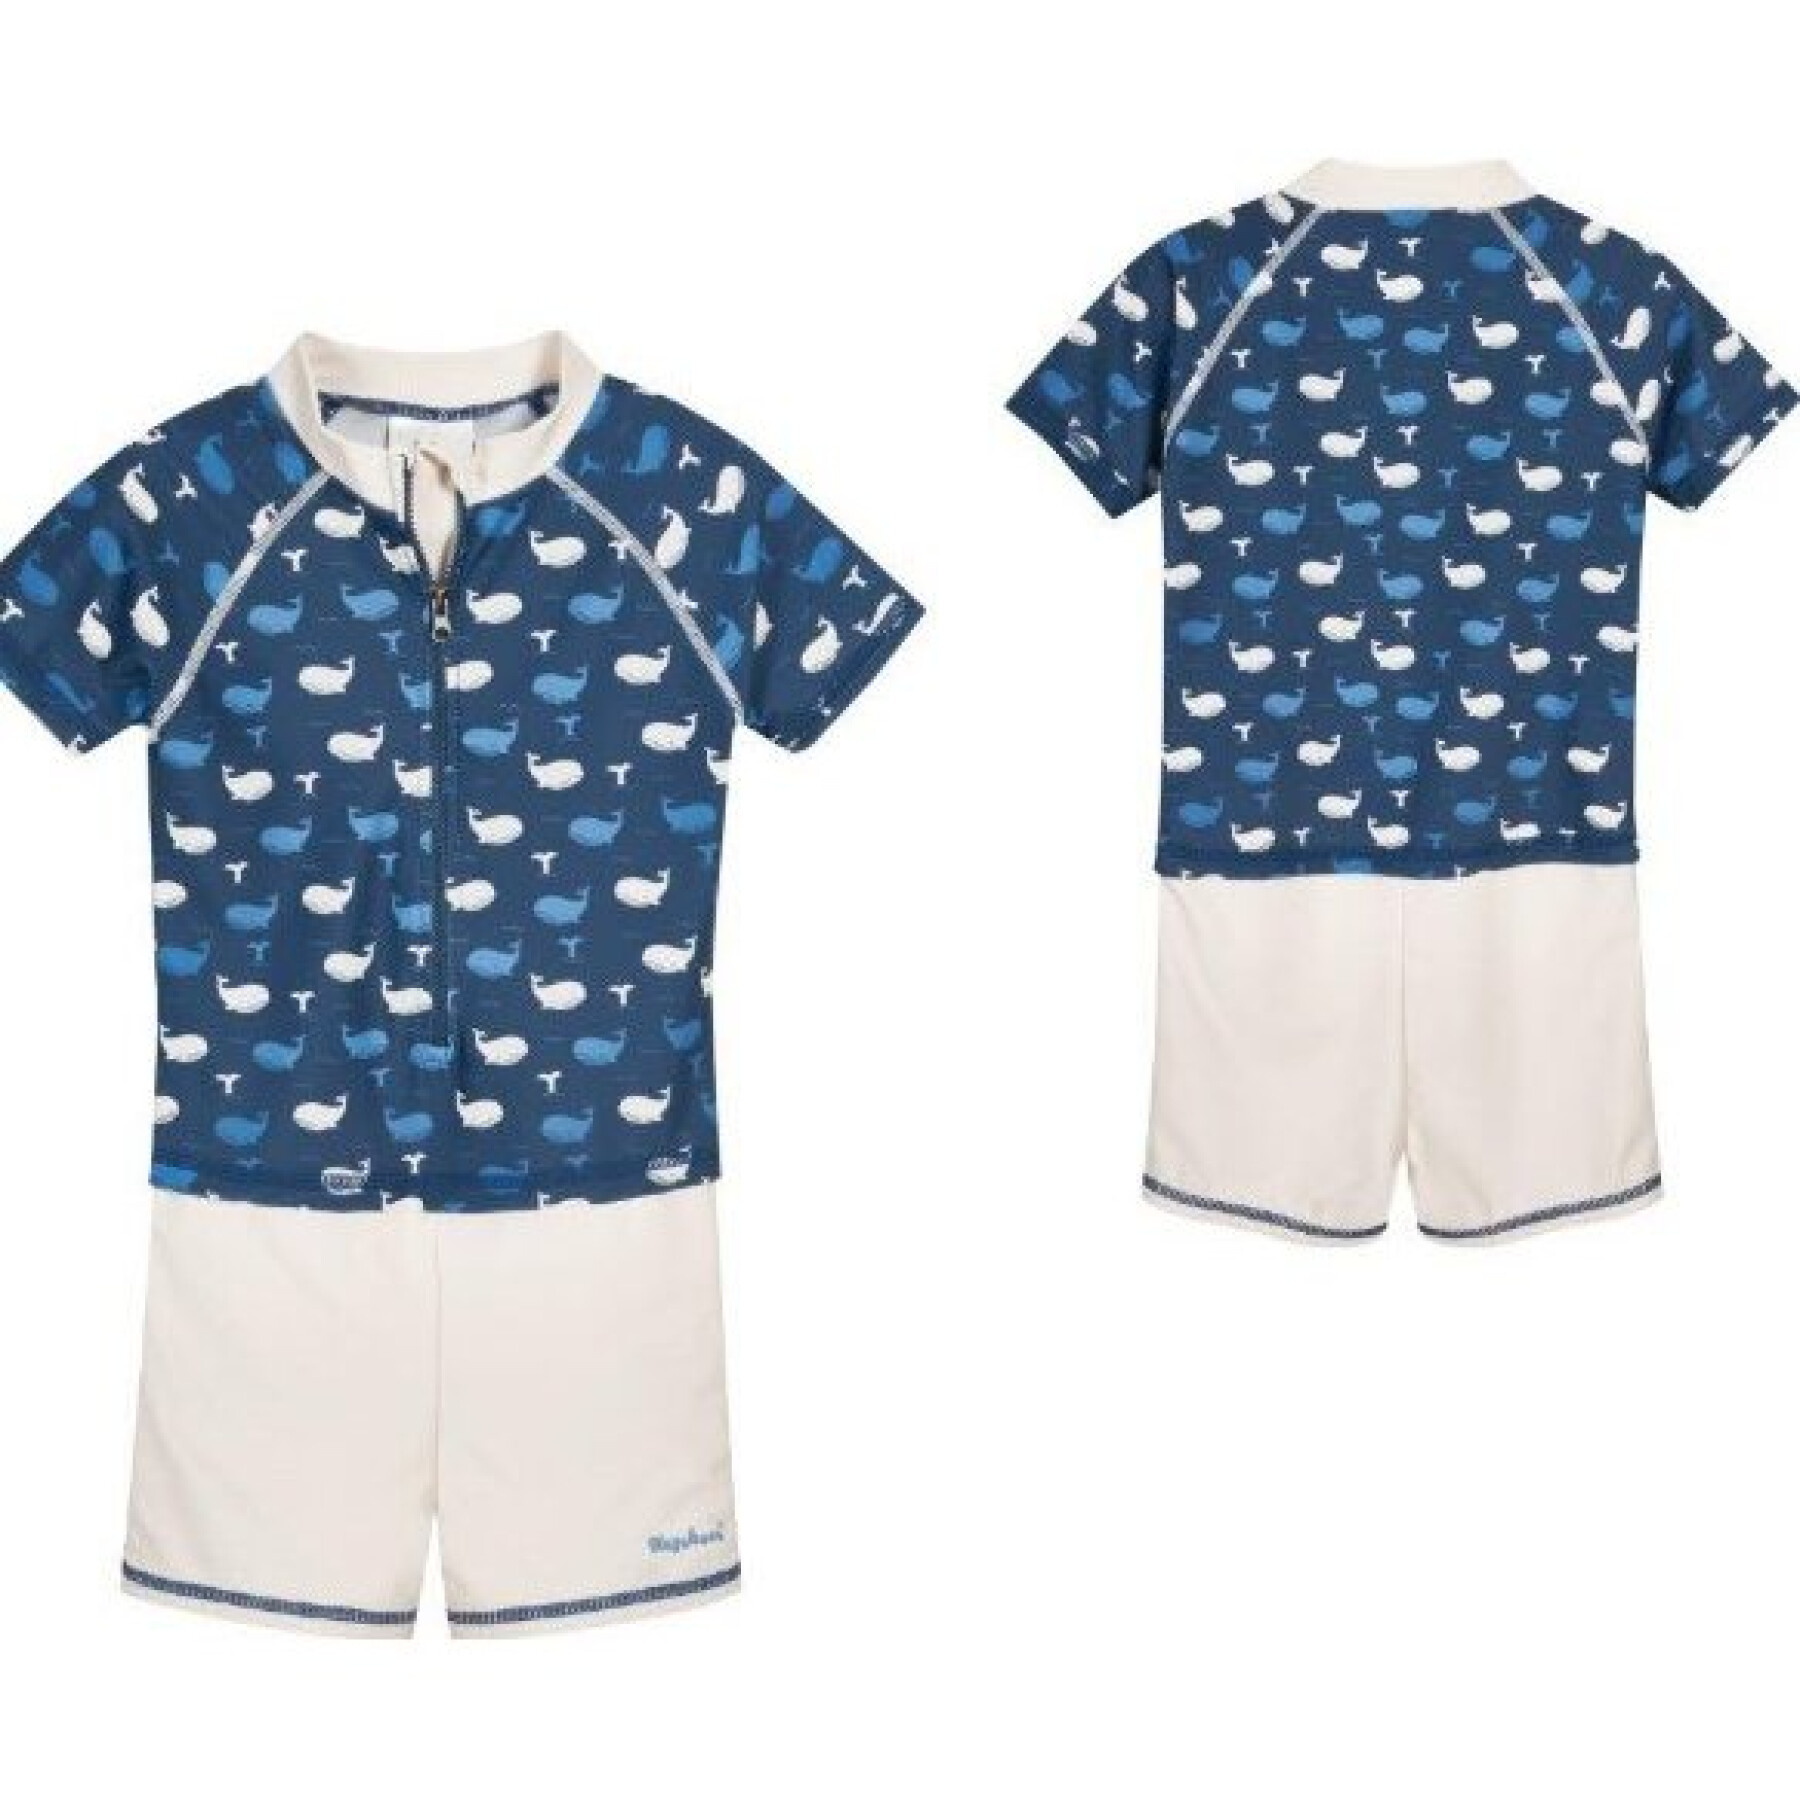 Combi-short uv protection short sleeves baby Playshoes Whale